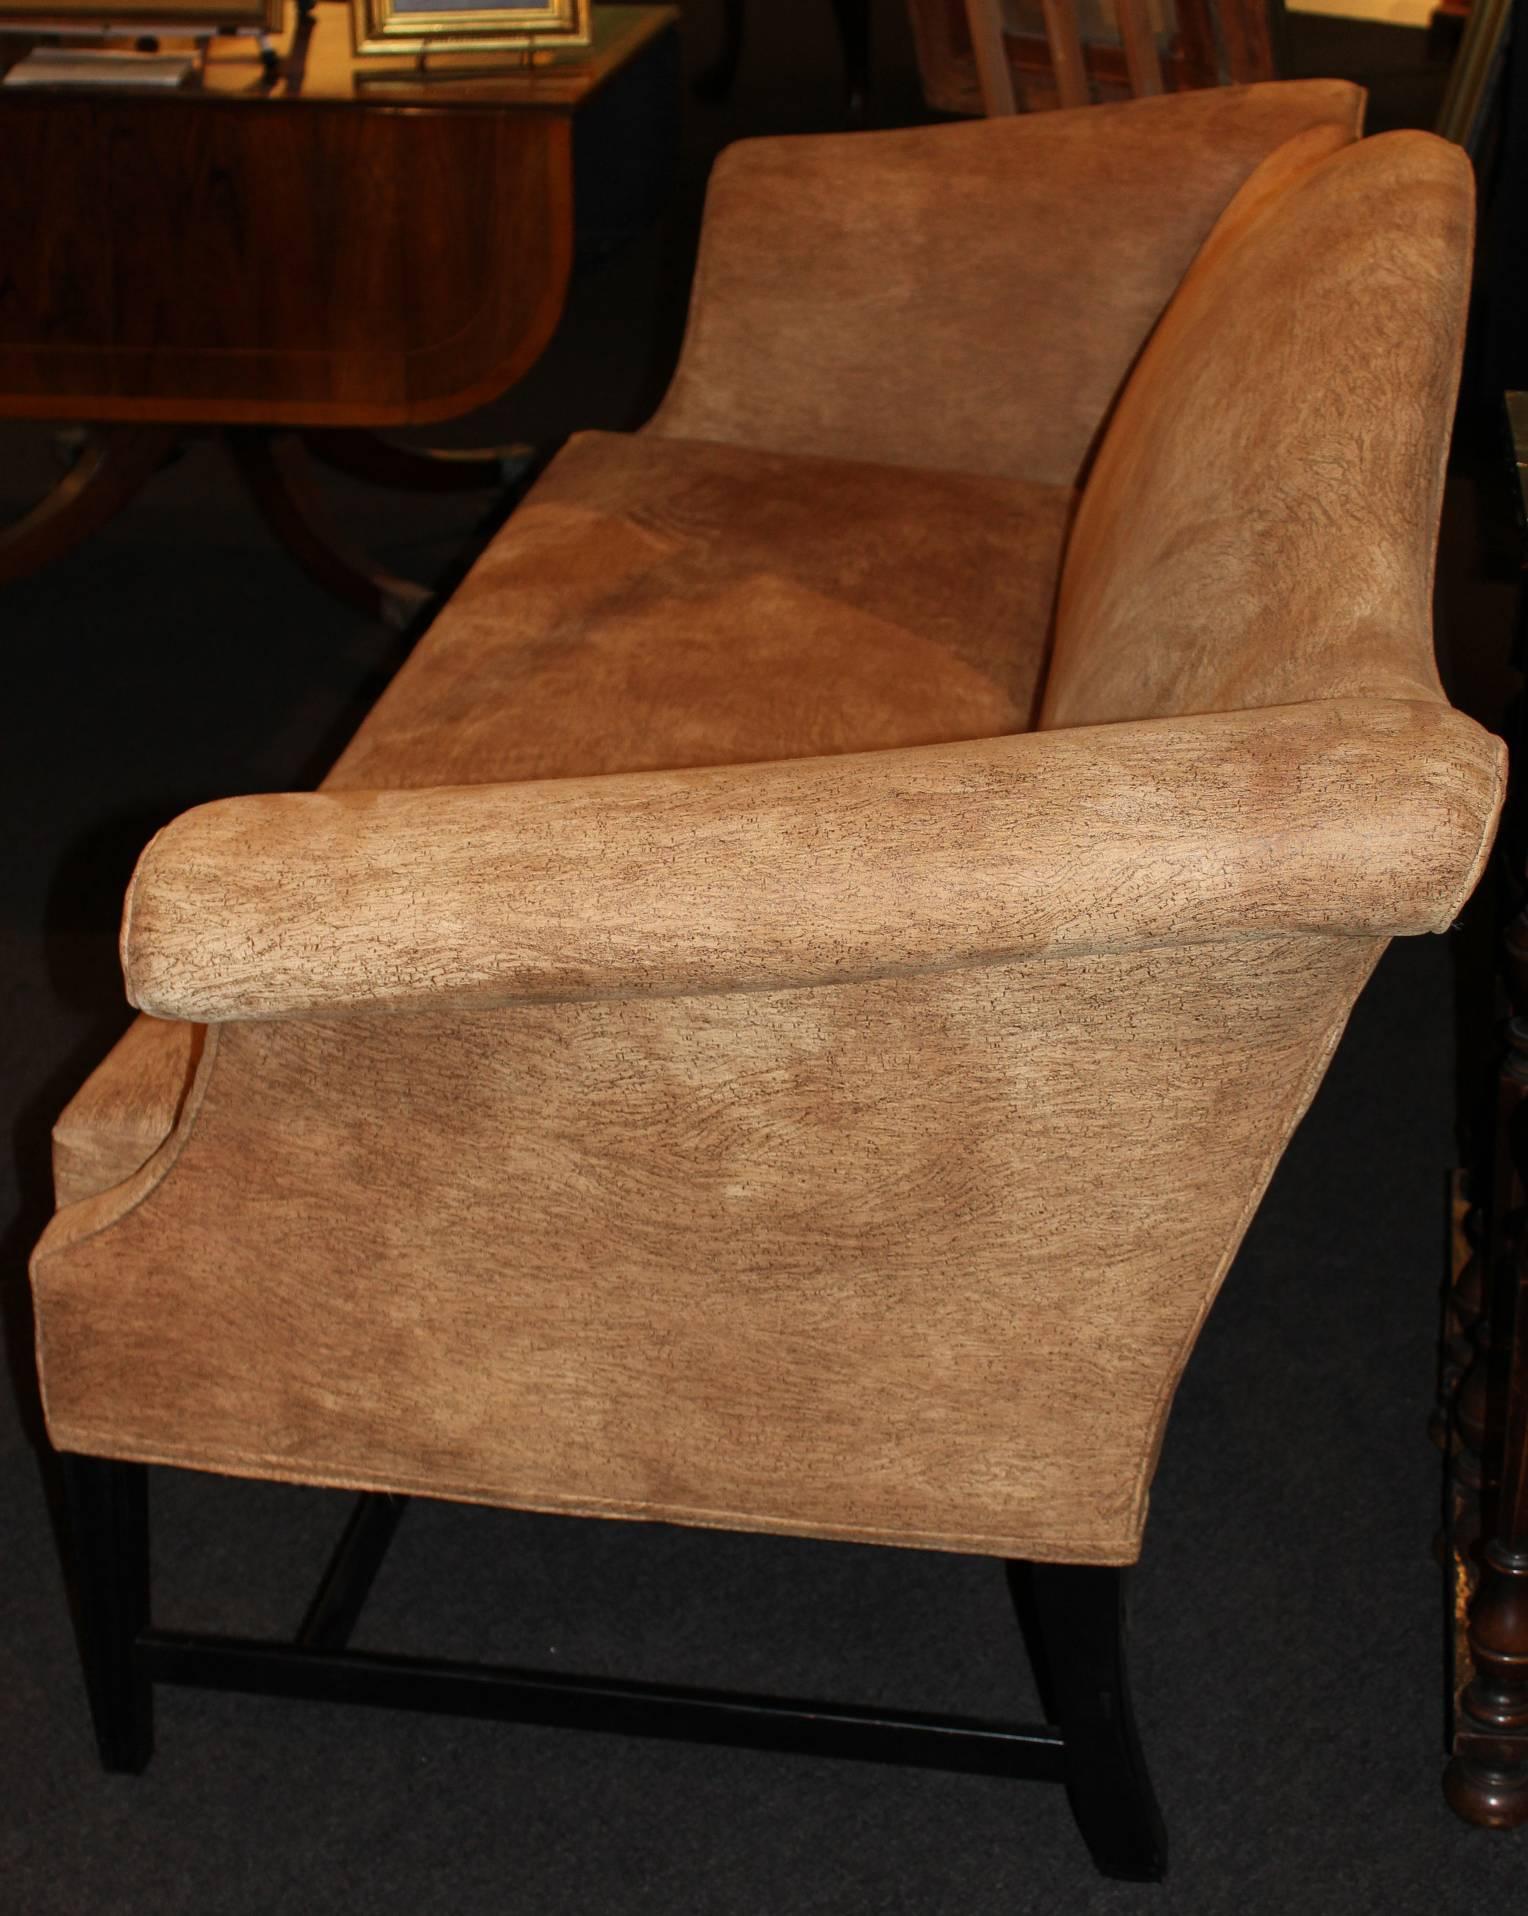 Chippendale Style Mahogany Camelback Sofa in Faux Cork Upholstery 1